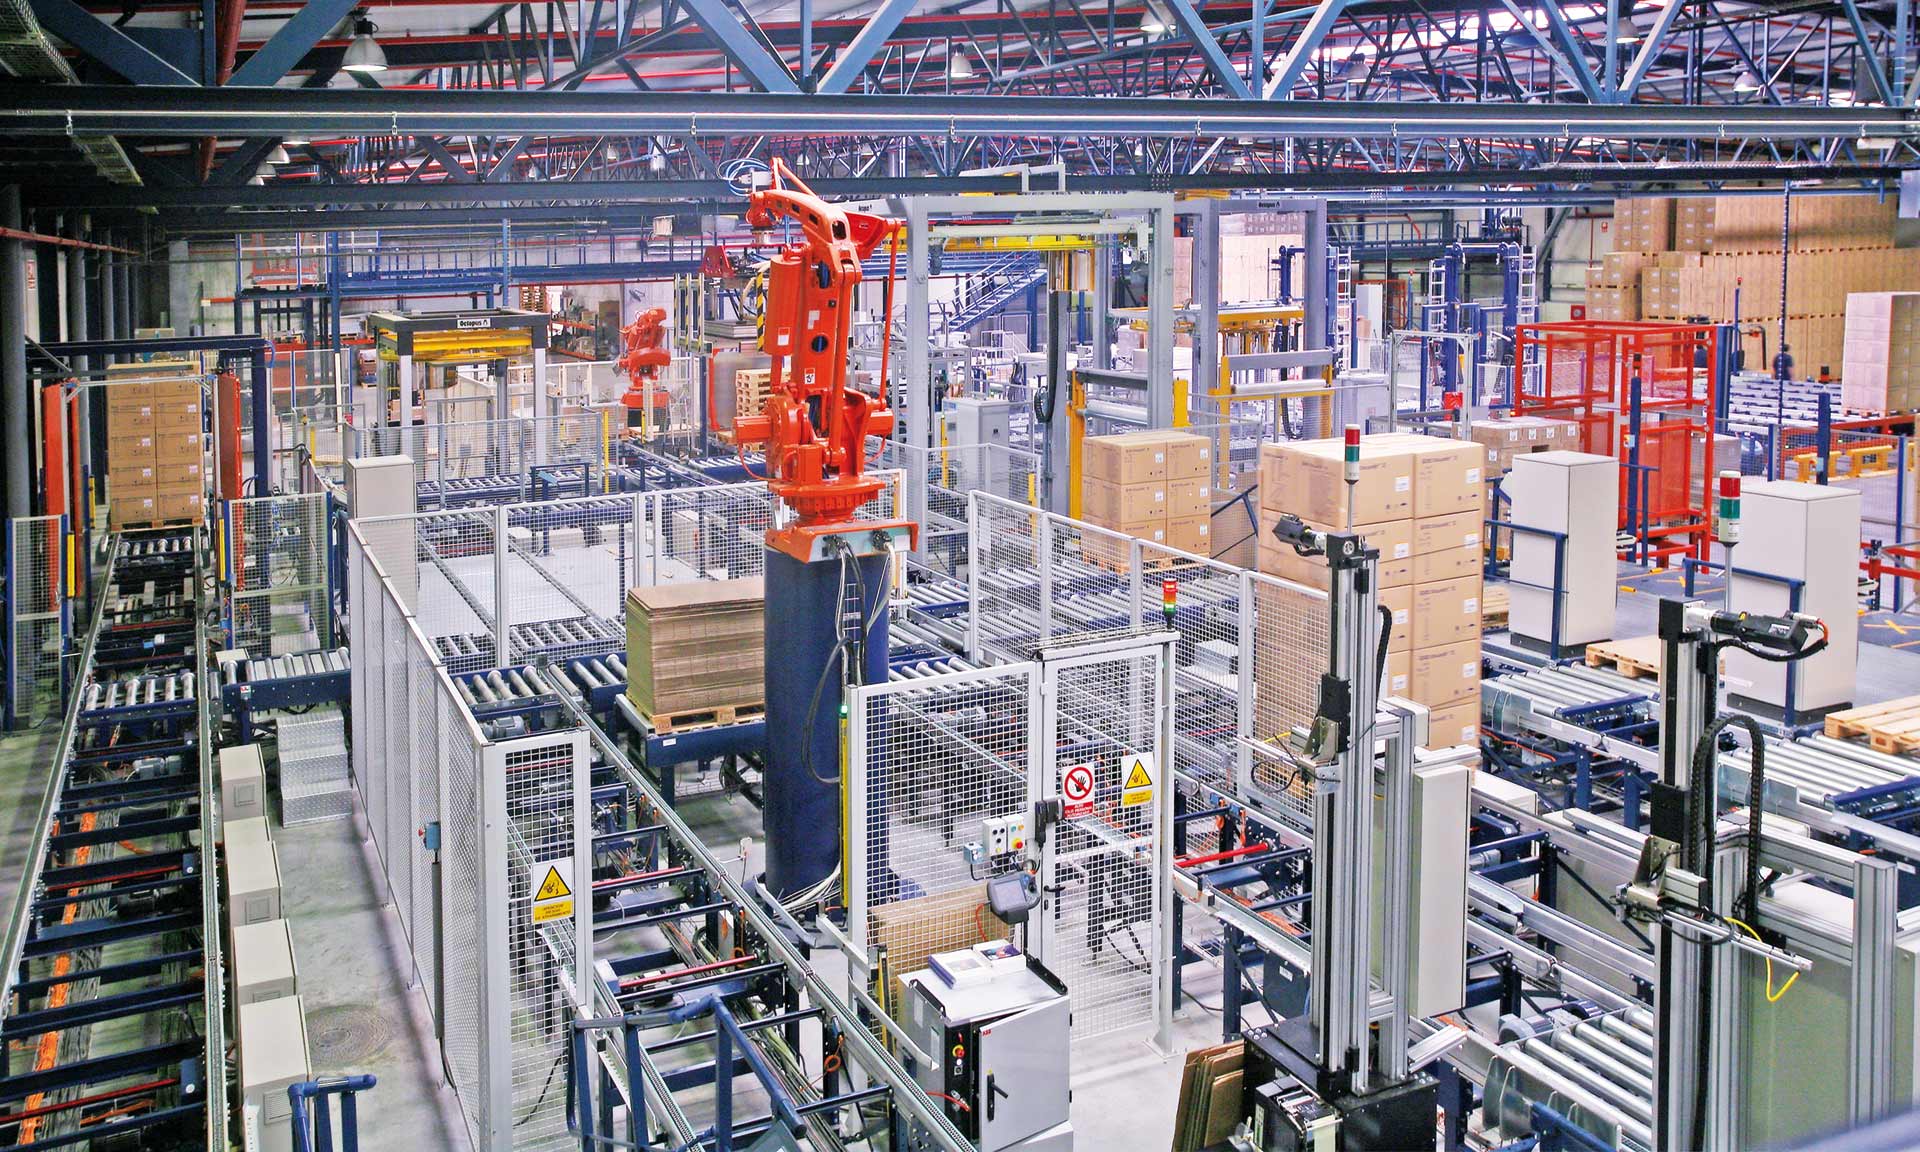 25 tips for optimizing safety in your warehouse